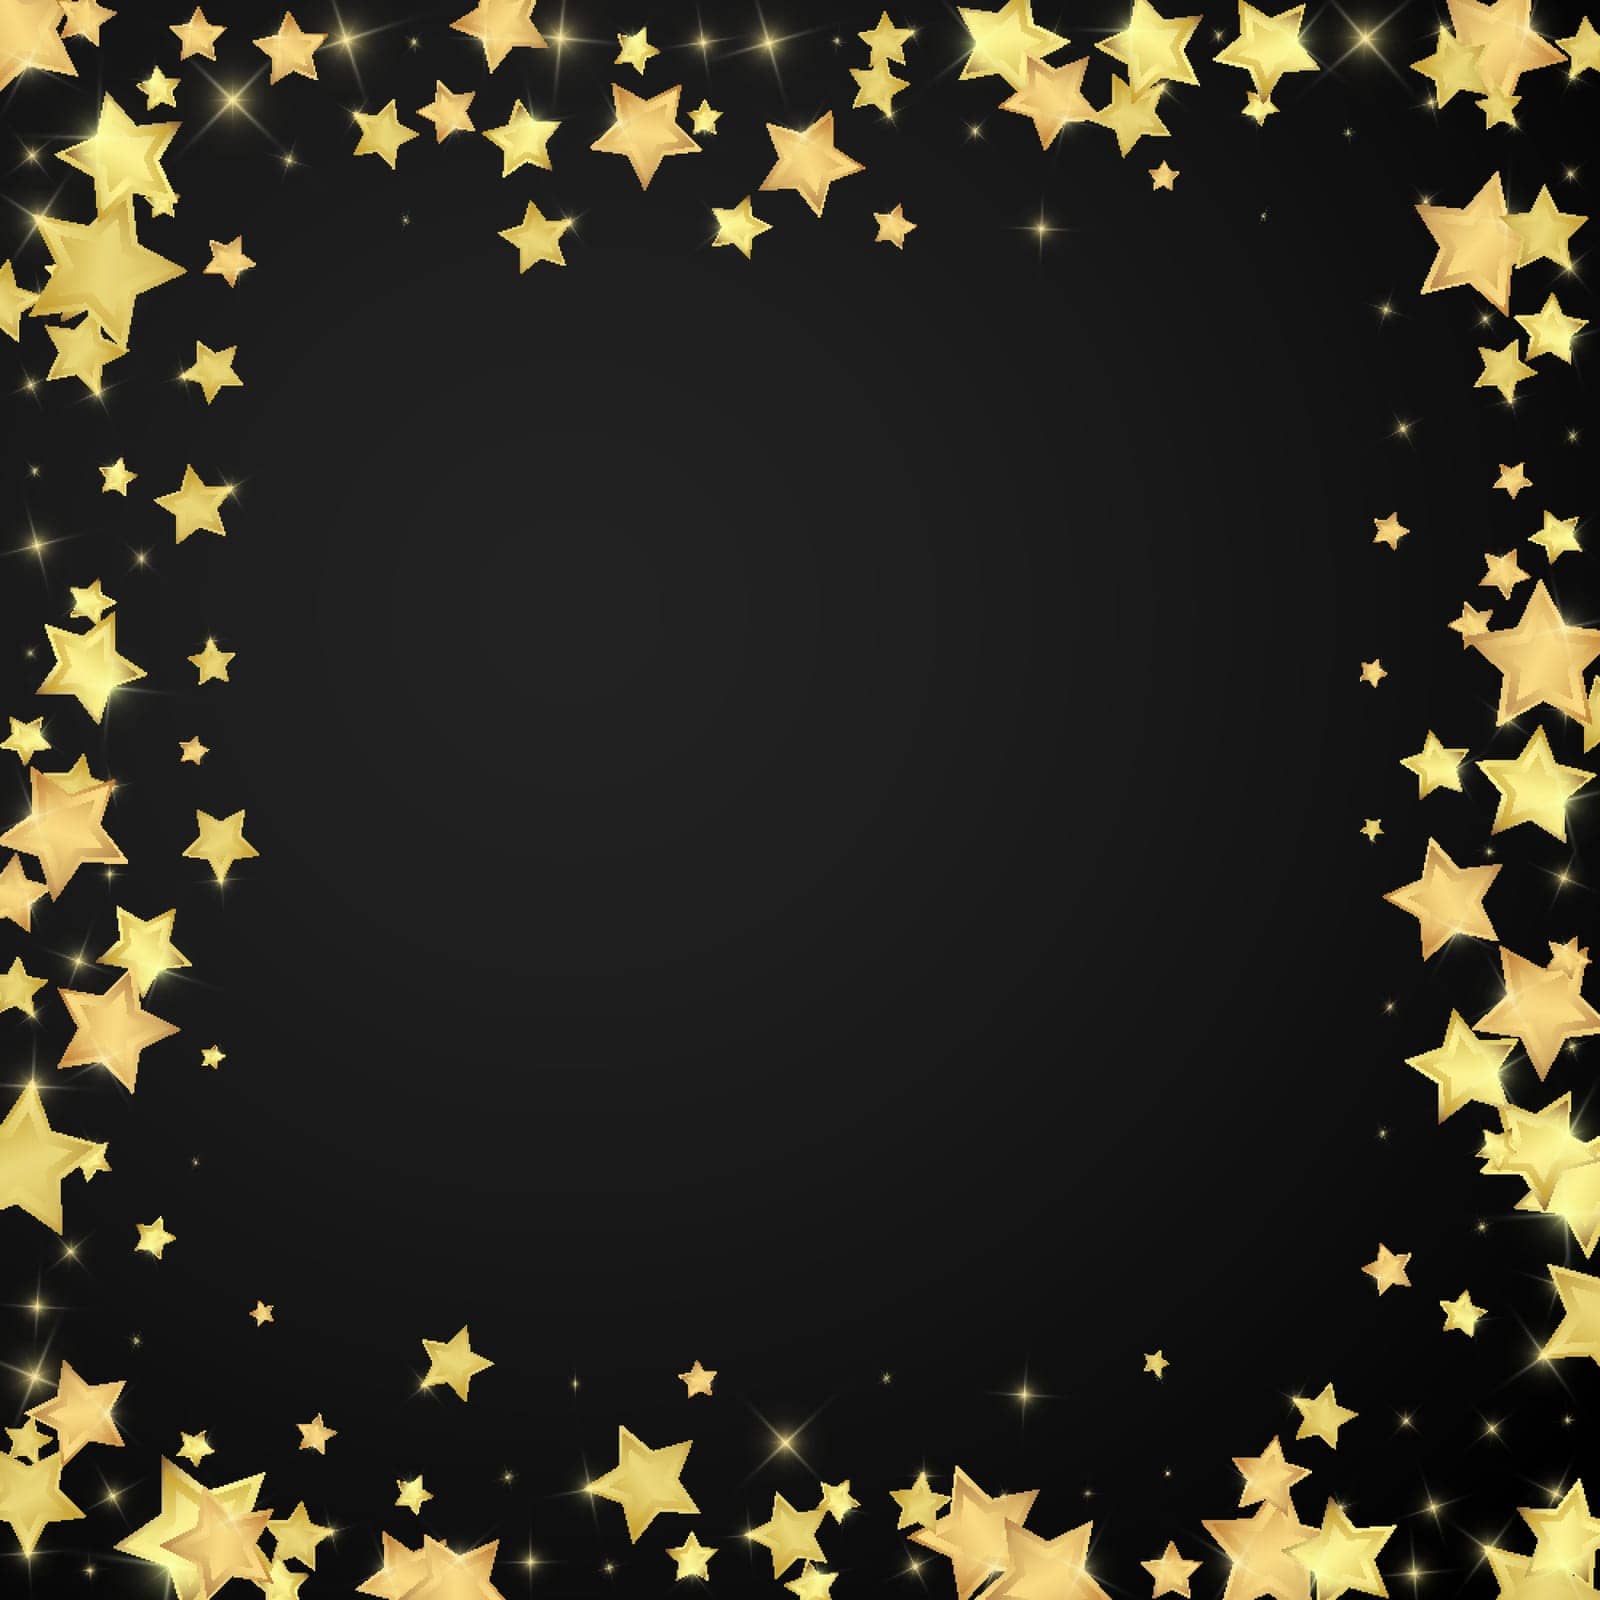 Magic stars vector overlay. Gold stars scattered around randomly, falling down, floating. Chaotic dreamy childish overlay template. Vector fairytale on black background.